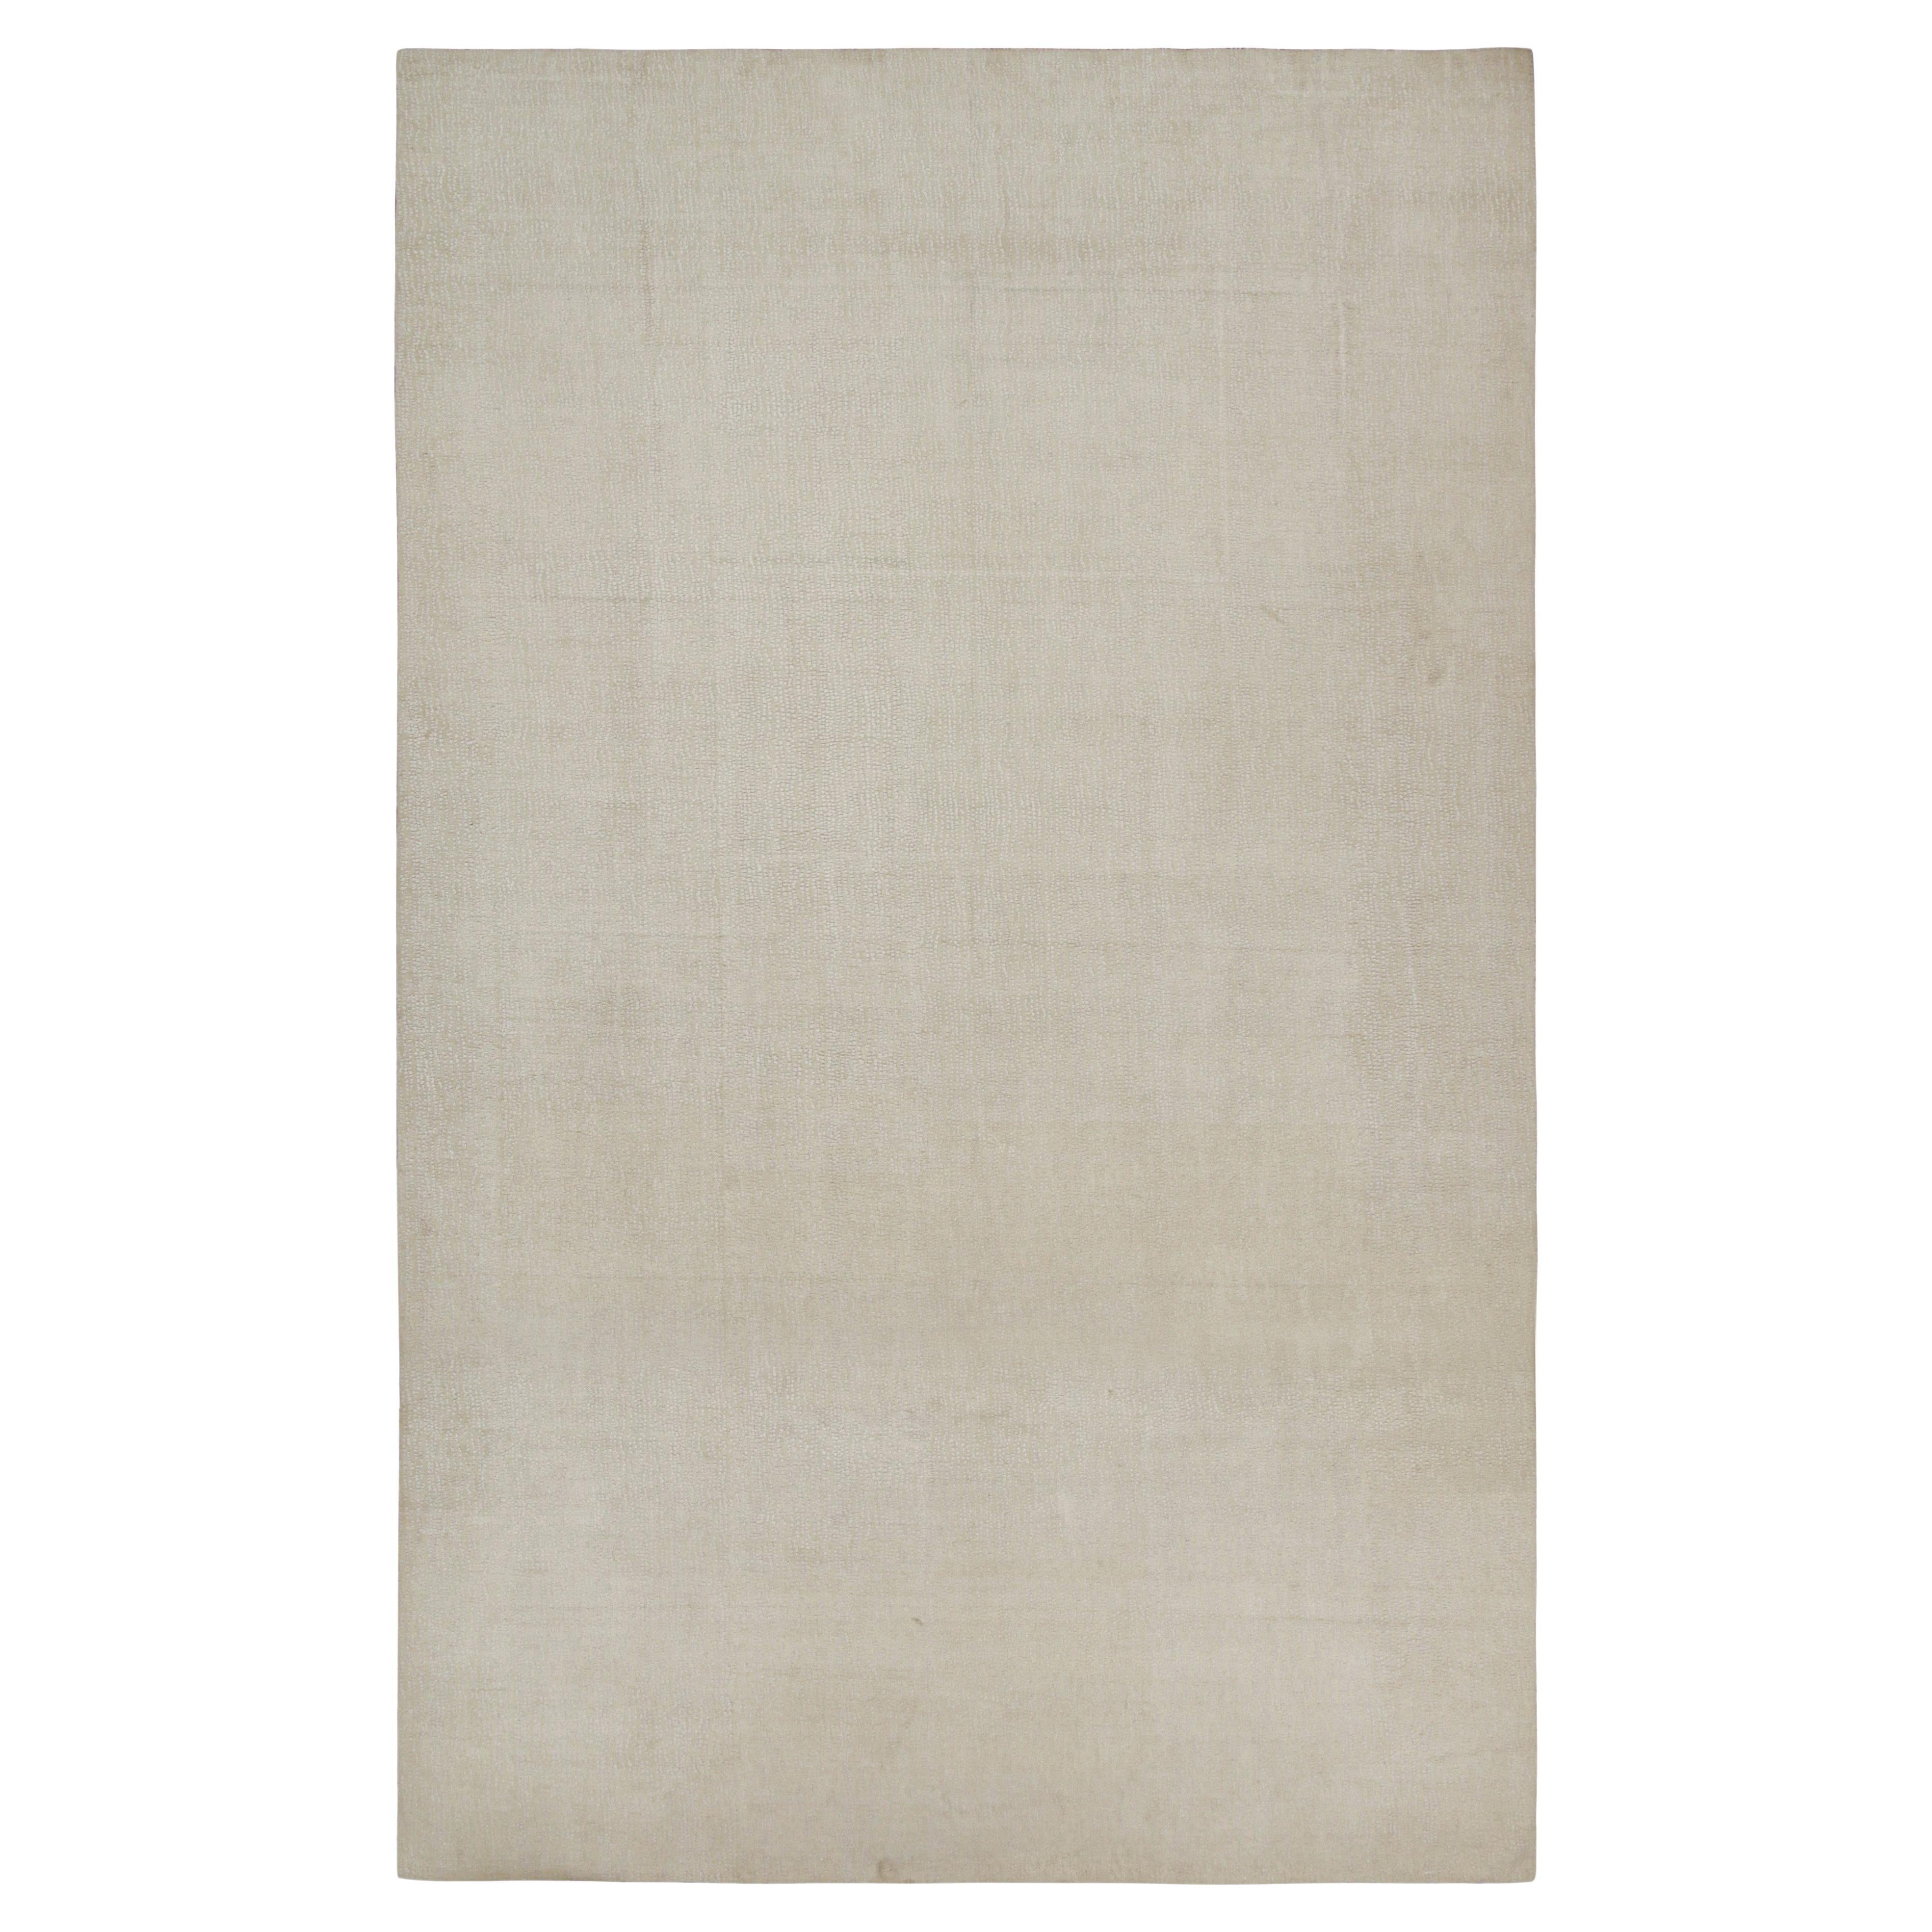 Rug & Kilim's Modern High-and-Low Textural Rug Design in Off-White im Angebot